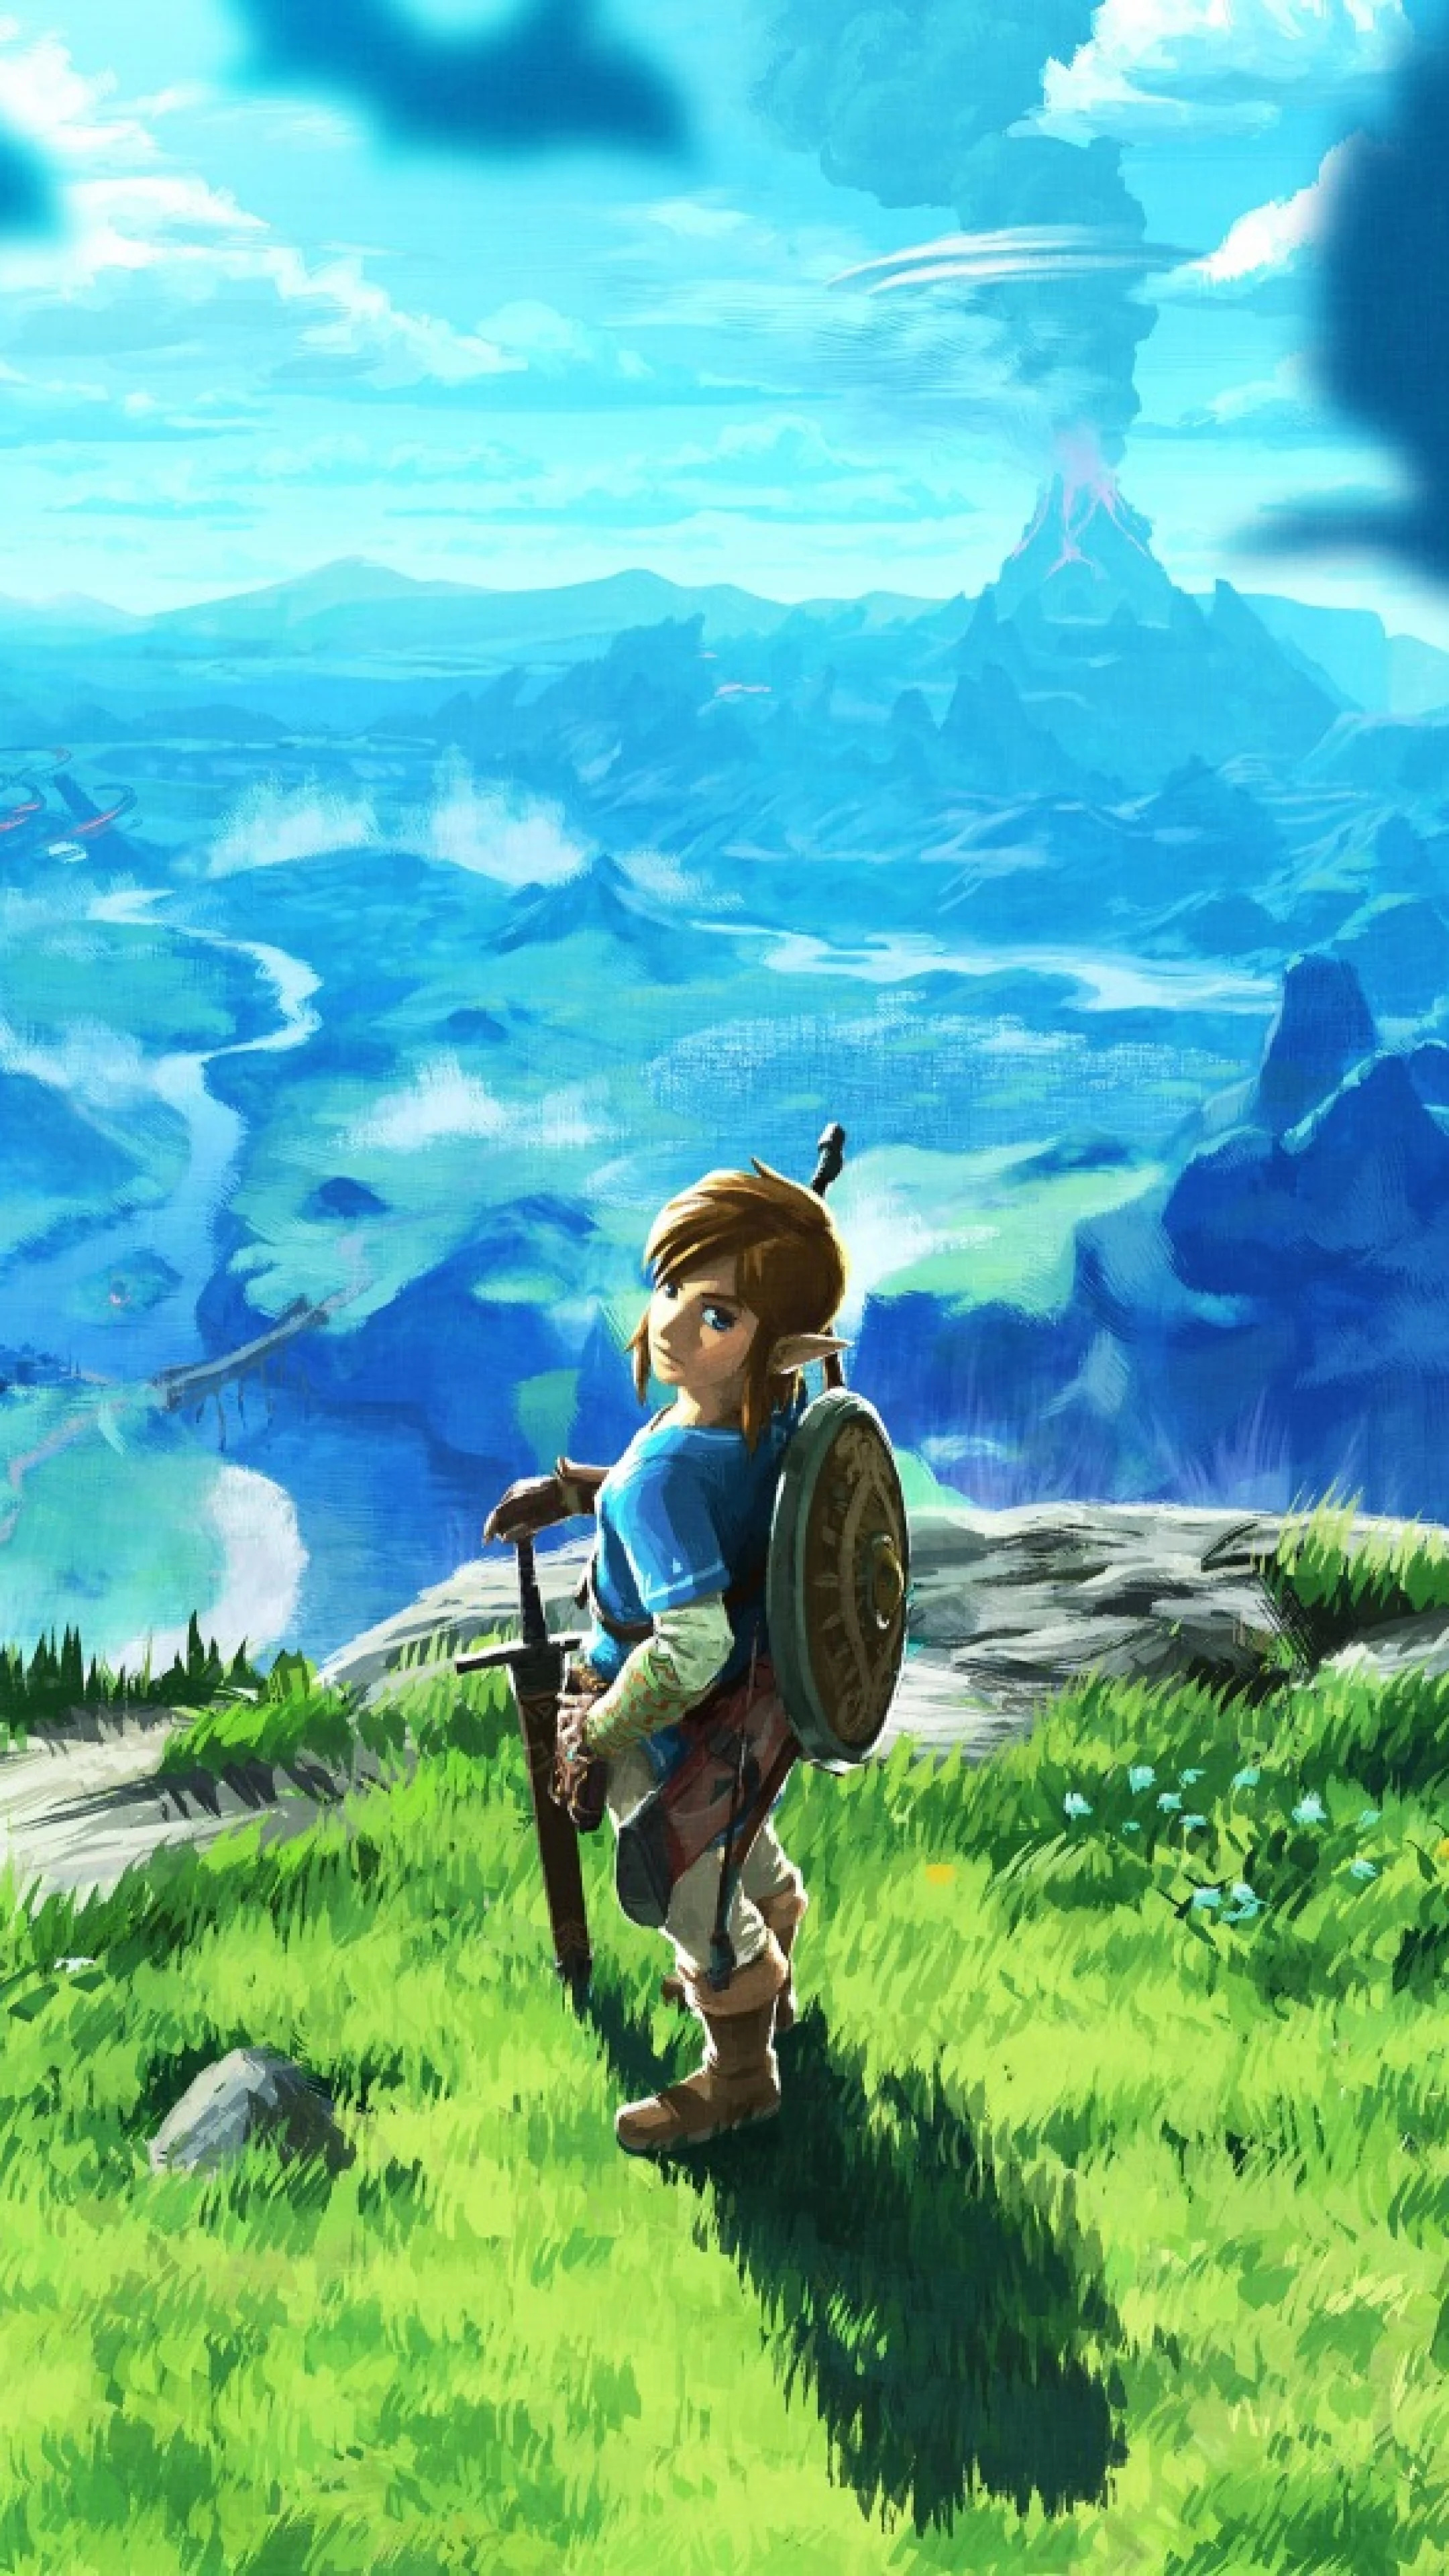 Breath of the Wild, Captivating wallpapers, Link's legend, Gaming masterpiece, 2160x3840 4K Handy